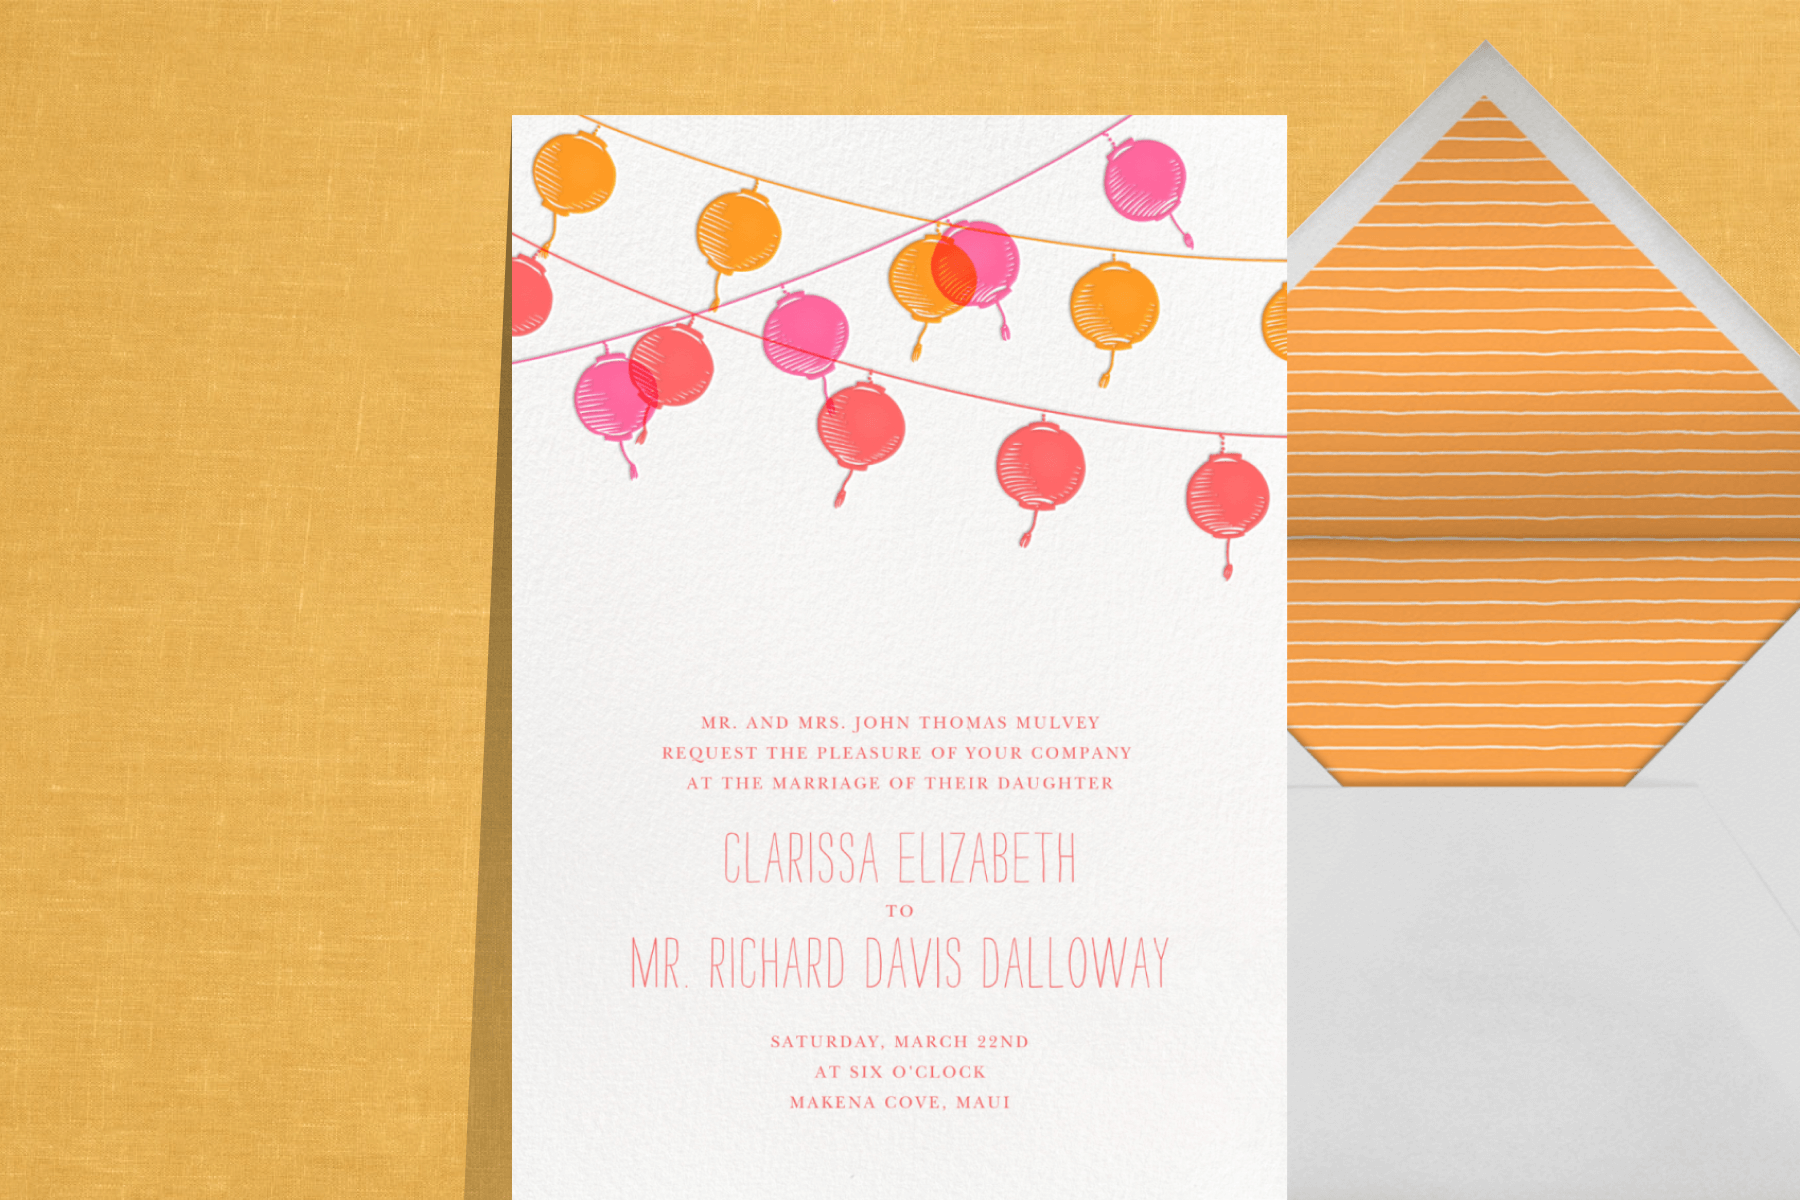 wedding invitation with orange, pink, and red paper lanterns at the top